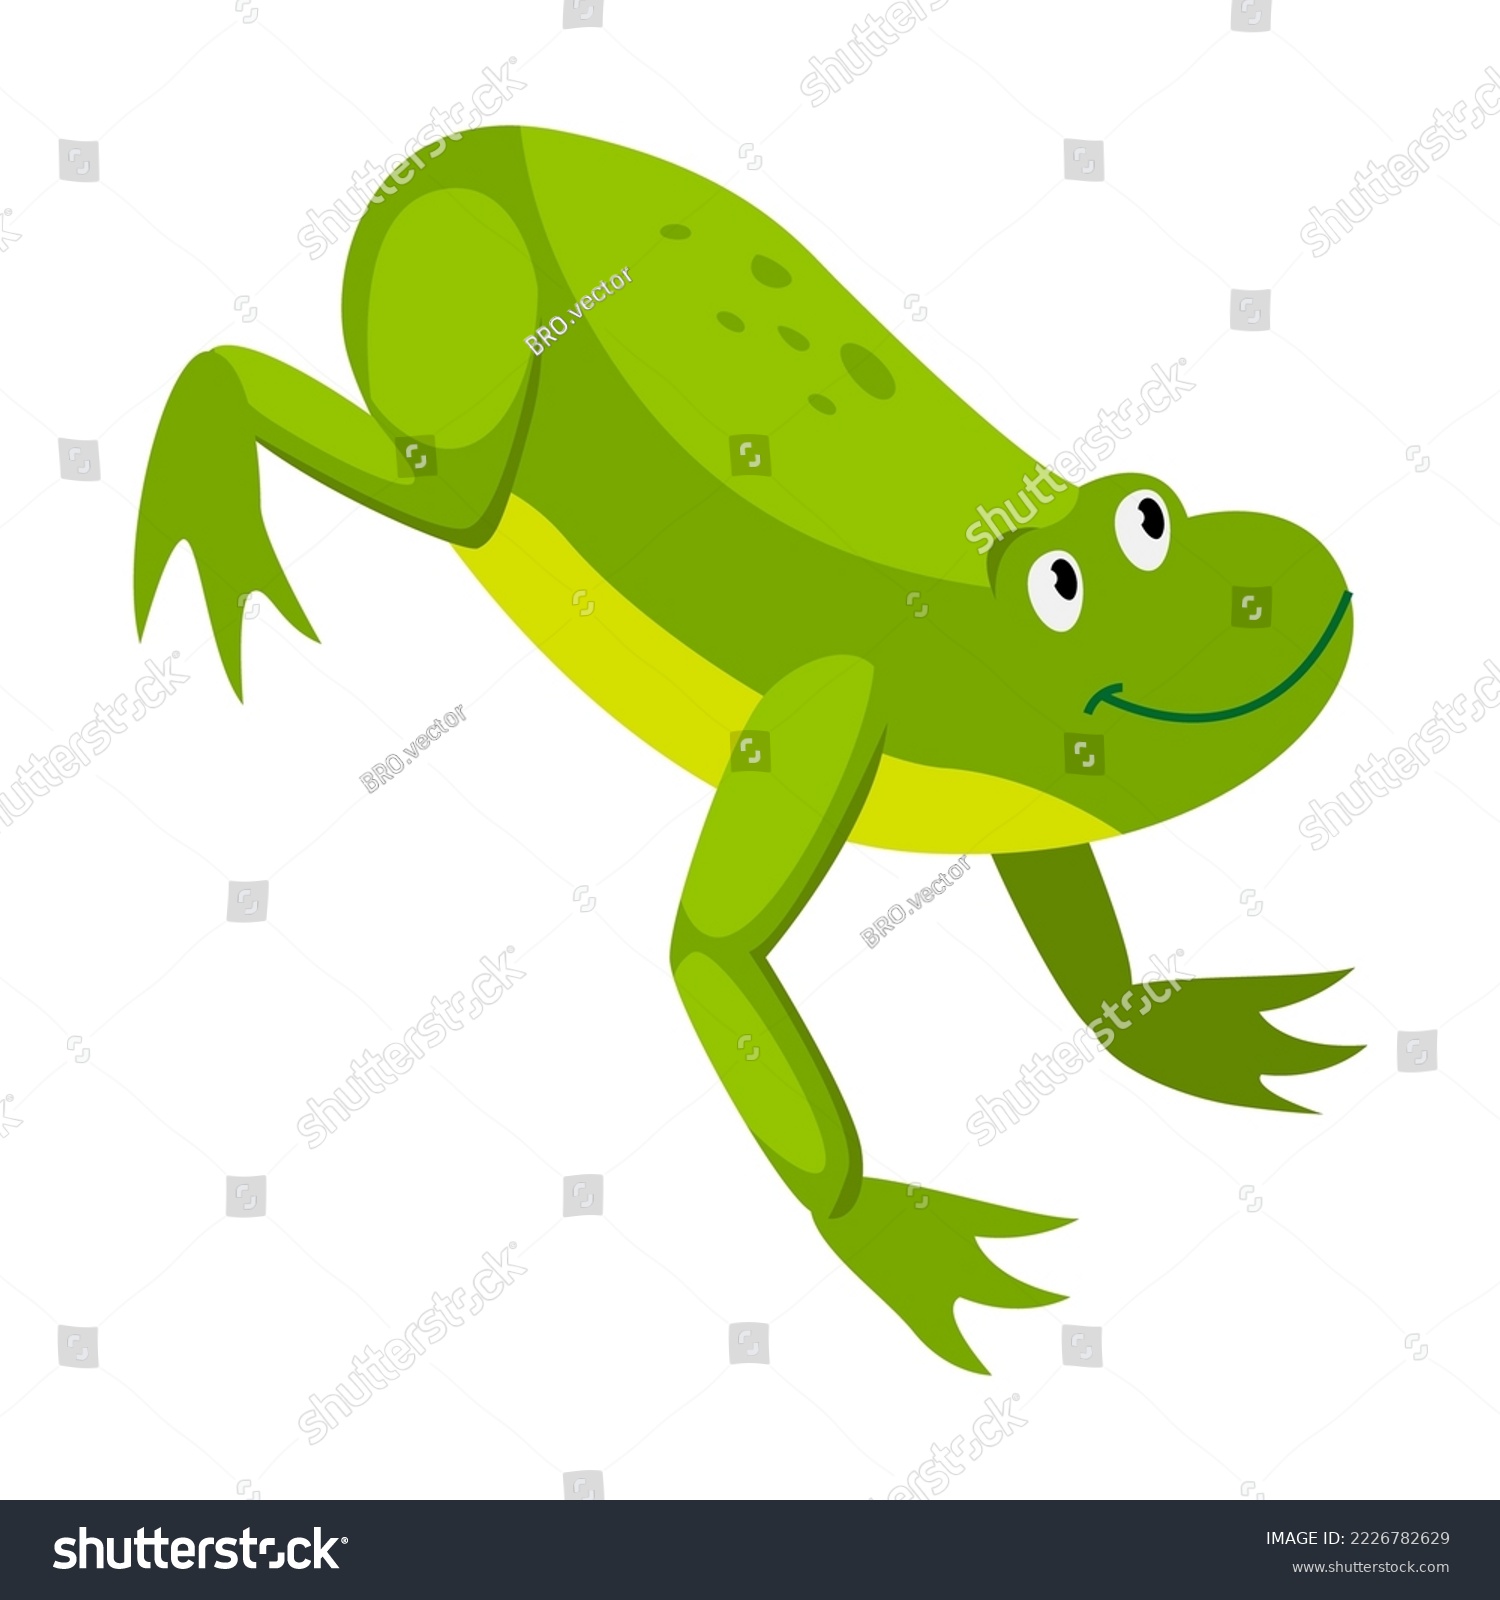 SVG of Green frog jumping. Cartoon vector illustration. Leaping toad on white background. Funny water animal. Nature, movement, amphibia, reptile, fauna concept for design svg